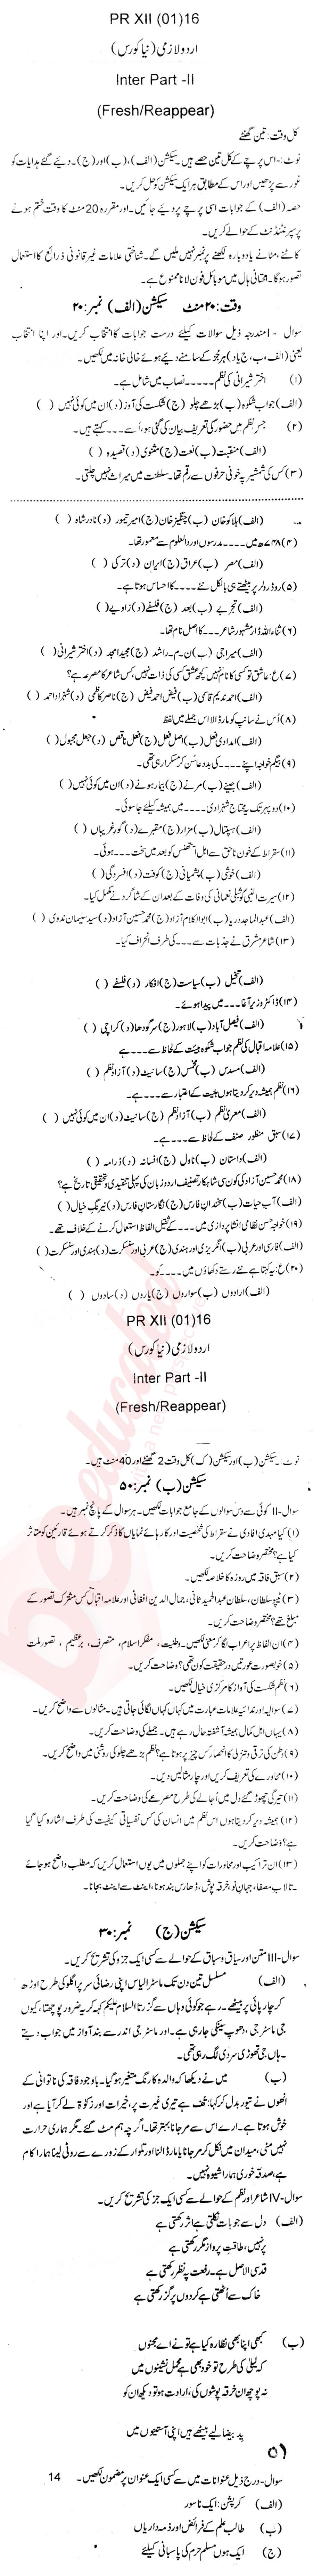 Urdu 12th class Past Paper Group 1 BISE Abbottabad 2016